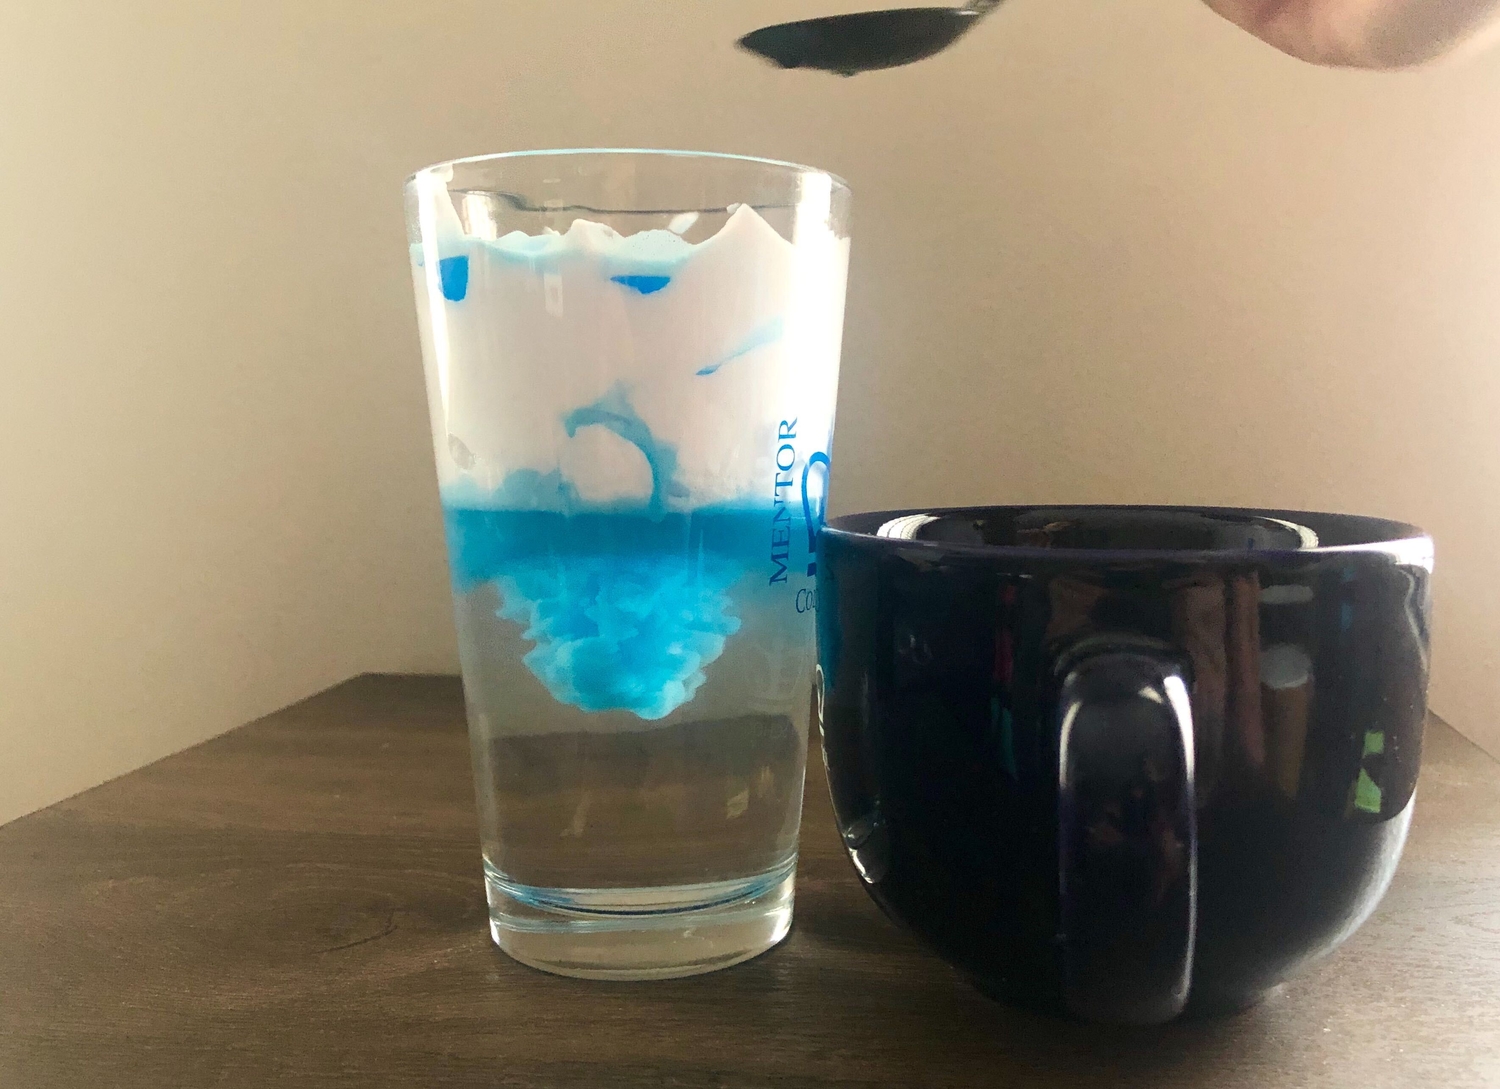 Stay-at-home science project: Whip up a storm in a glass